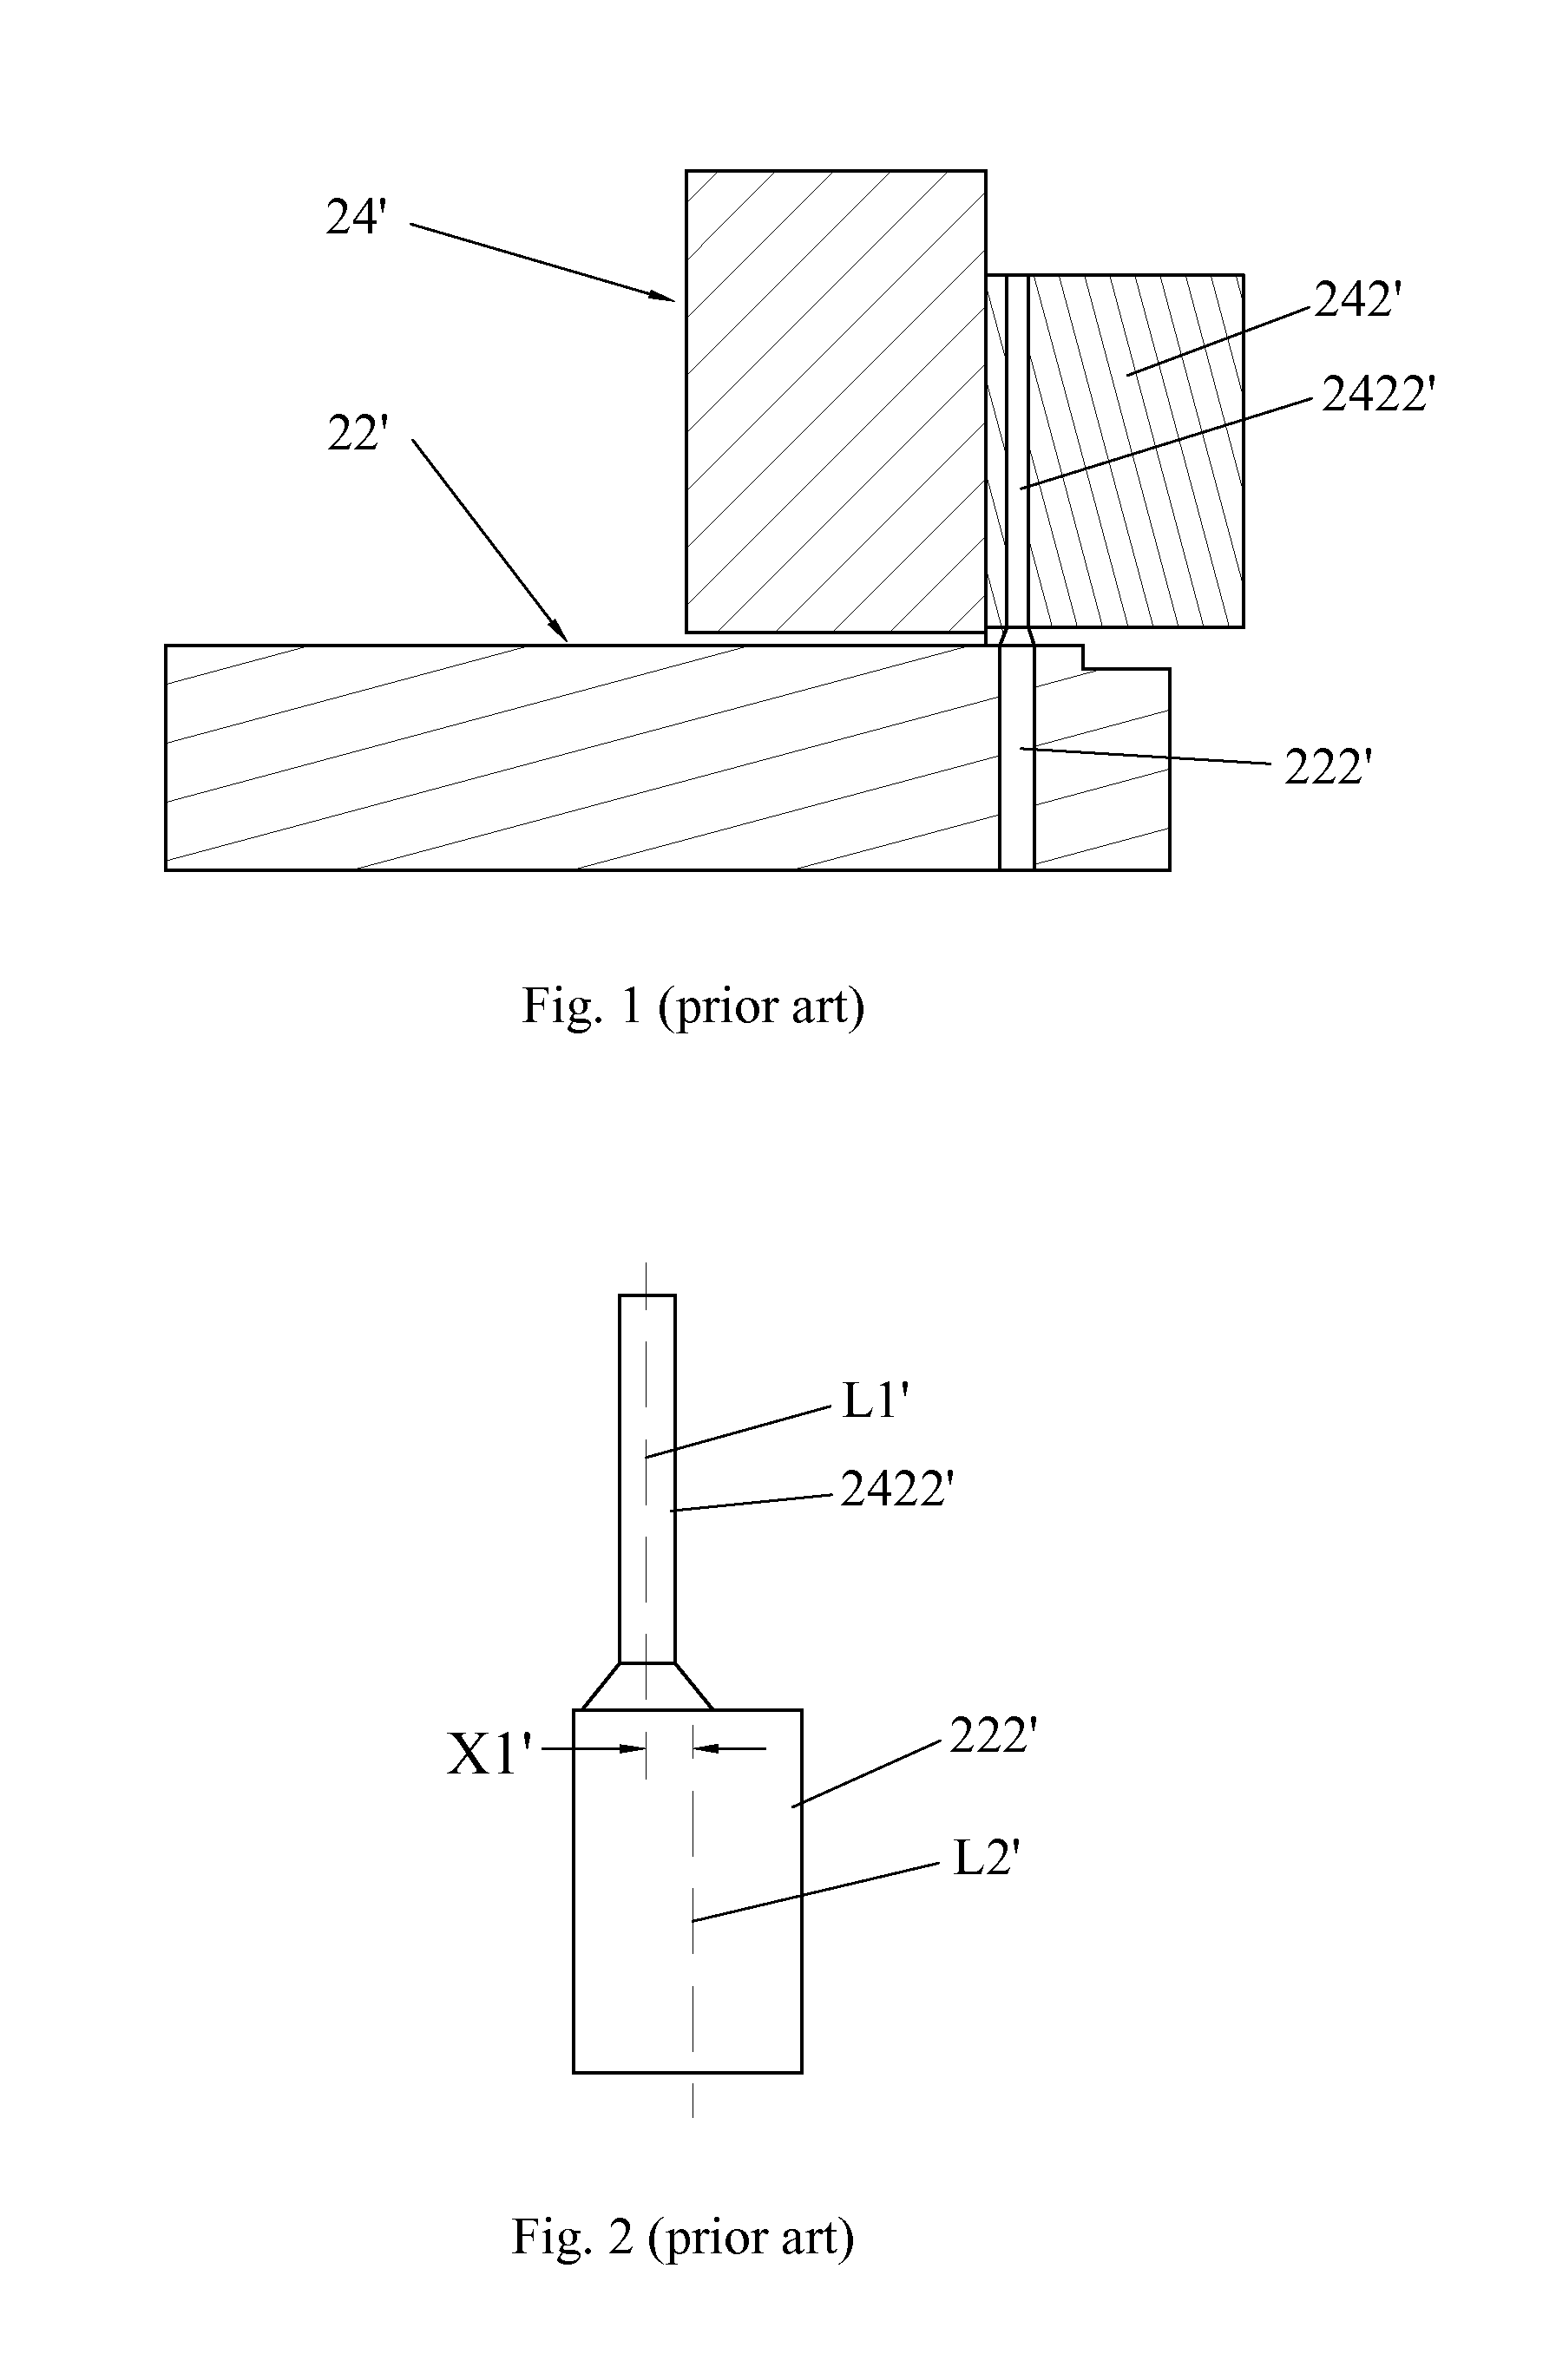 Method of testing thermally-assisted magnetic head